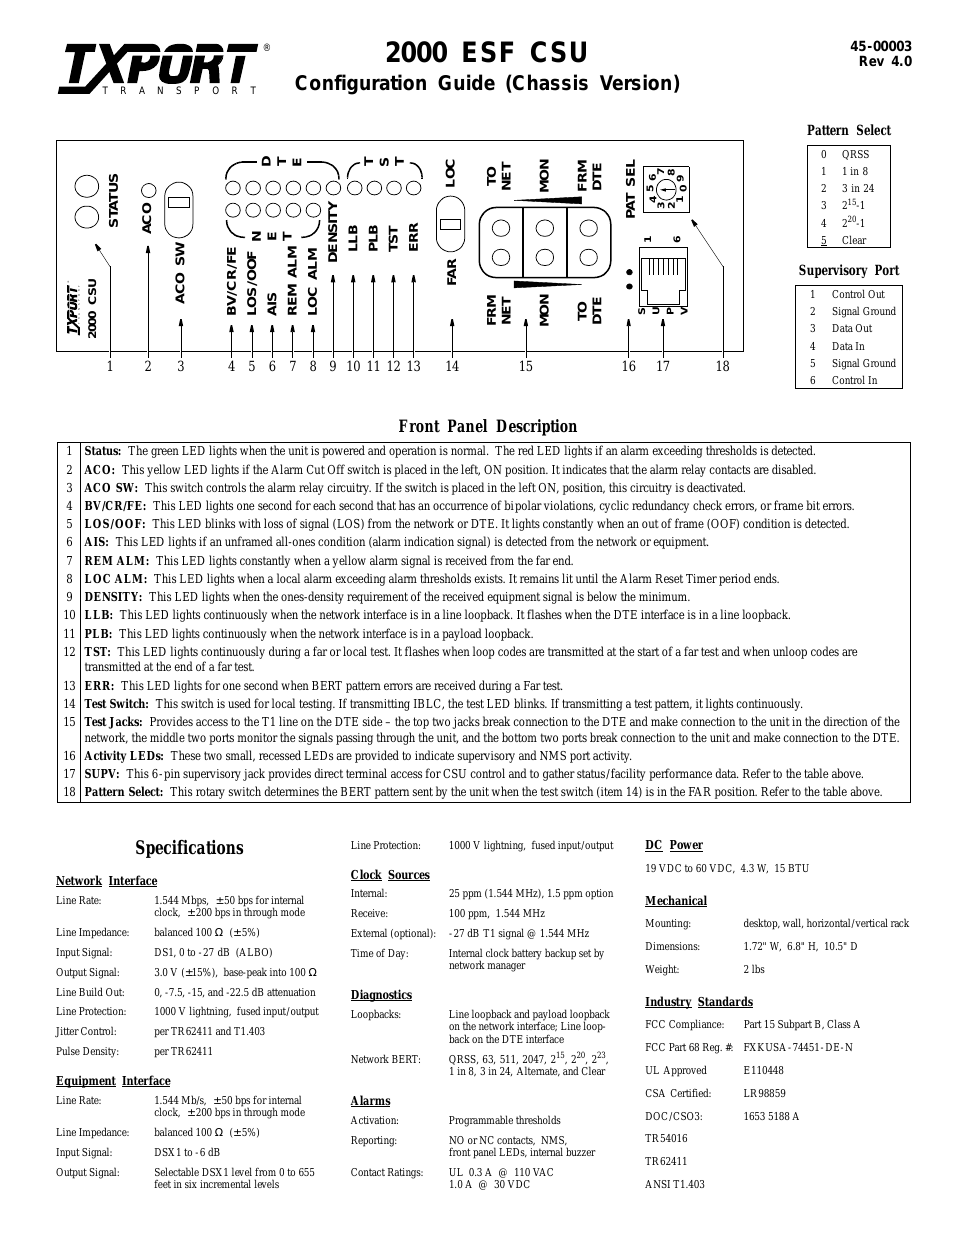 2000 (1051-2 Chassis) (CG) Configuration/Installation Guide